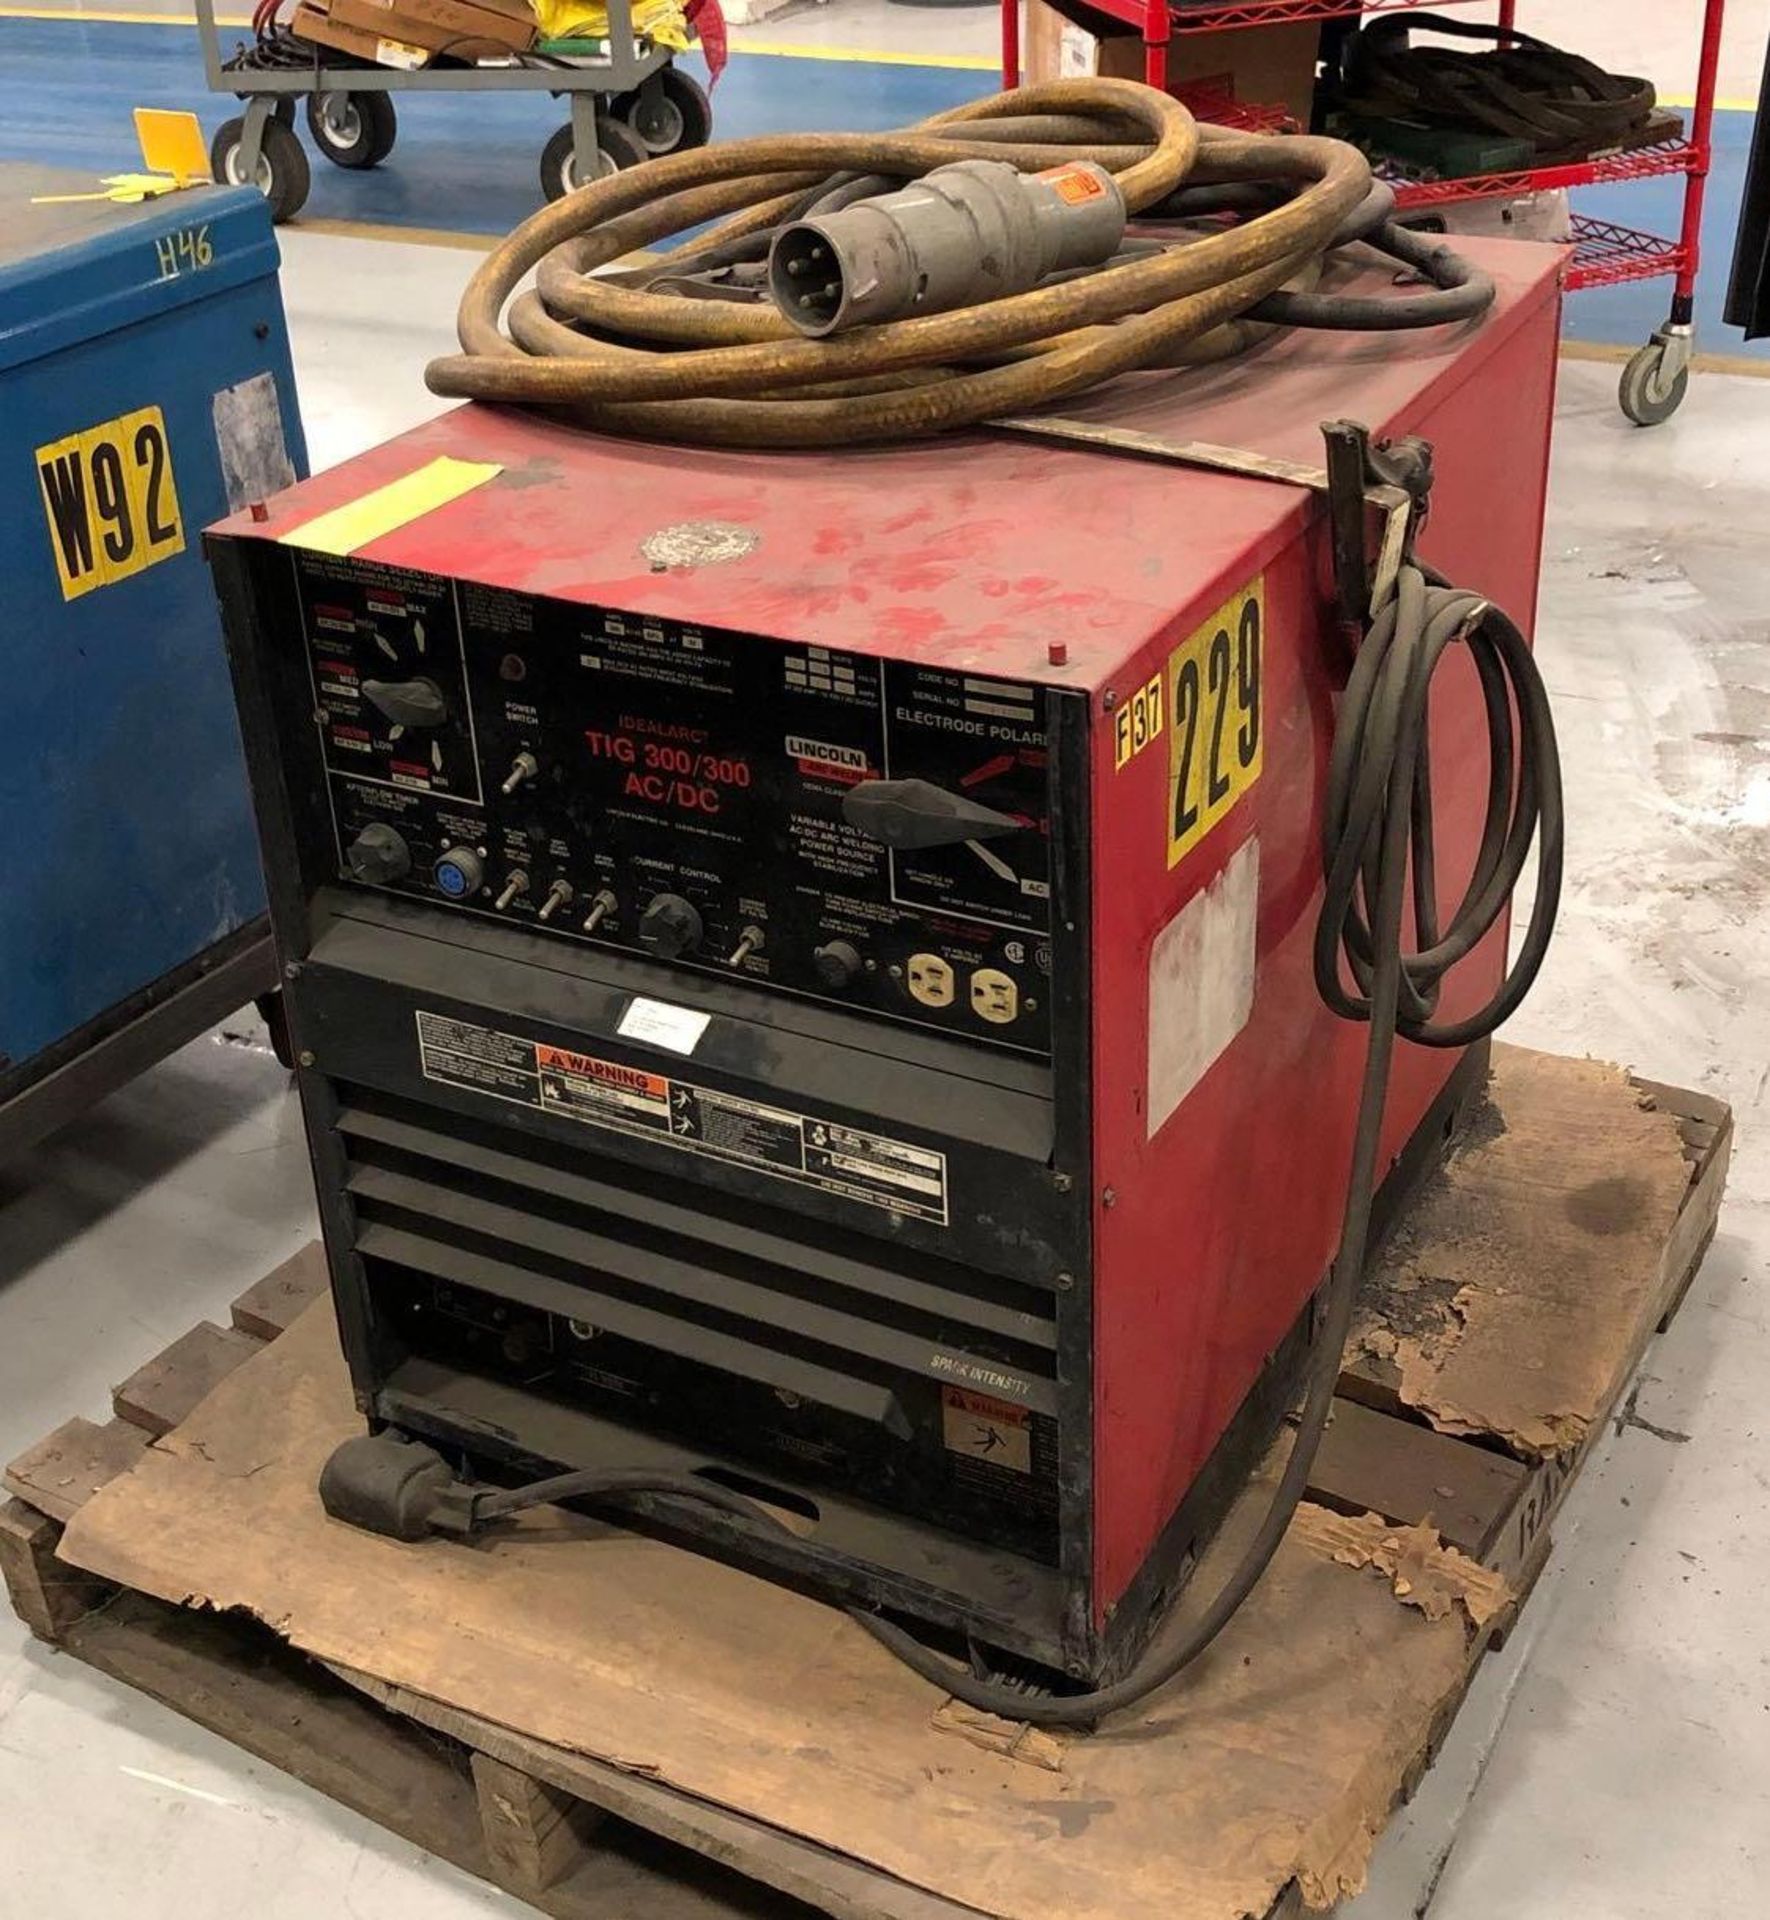 Lincoln 300Amp Idealarc TIG 300/300 Power Supply w/ Cables - Image 3 of 16